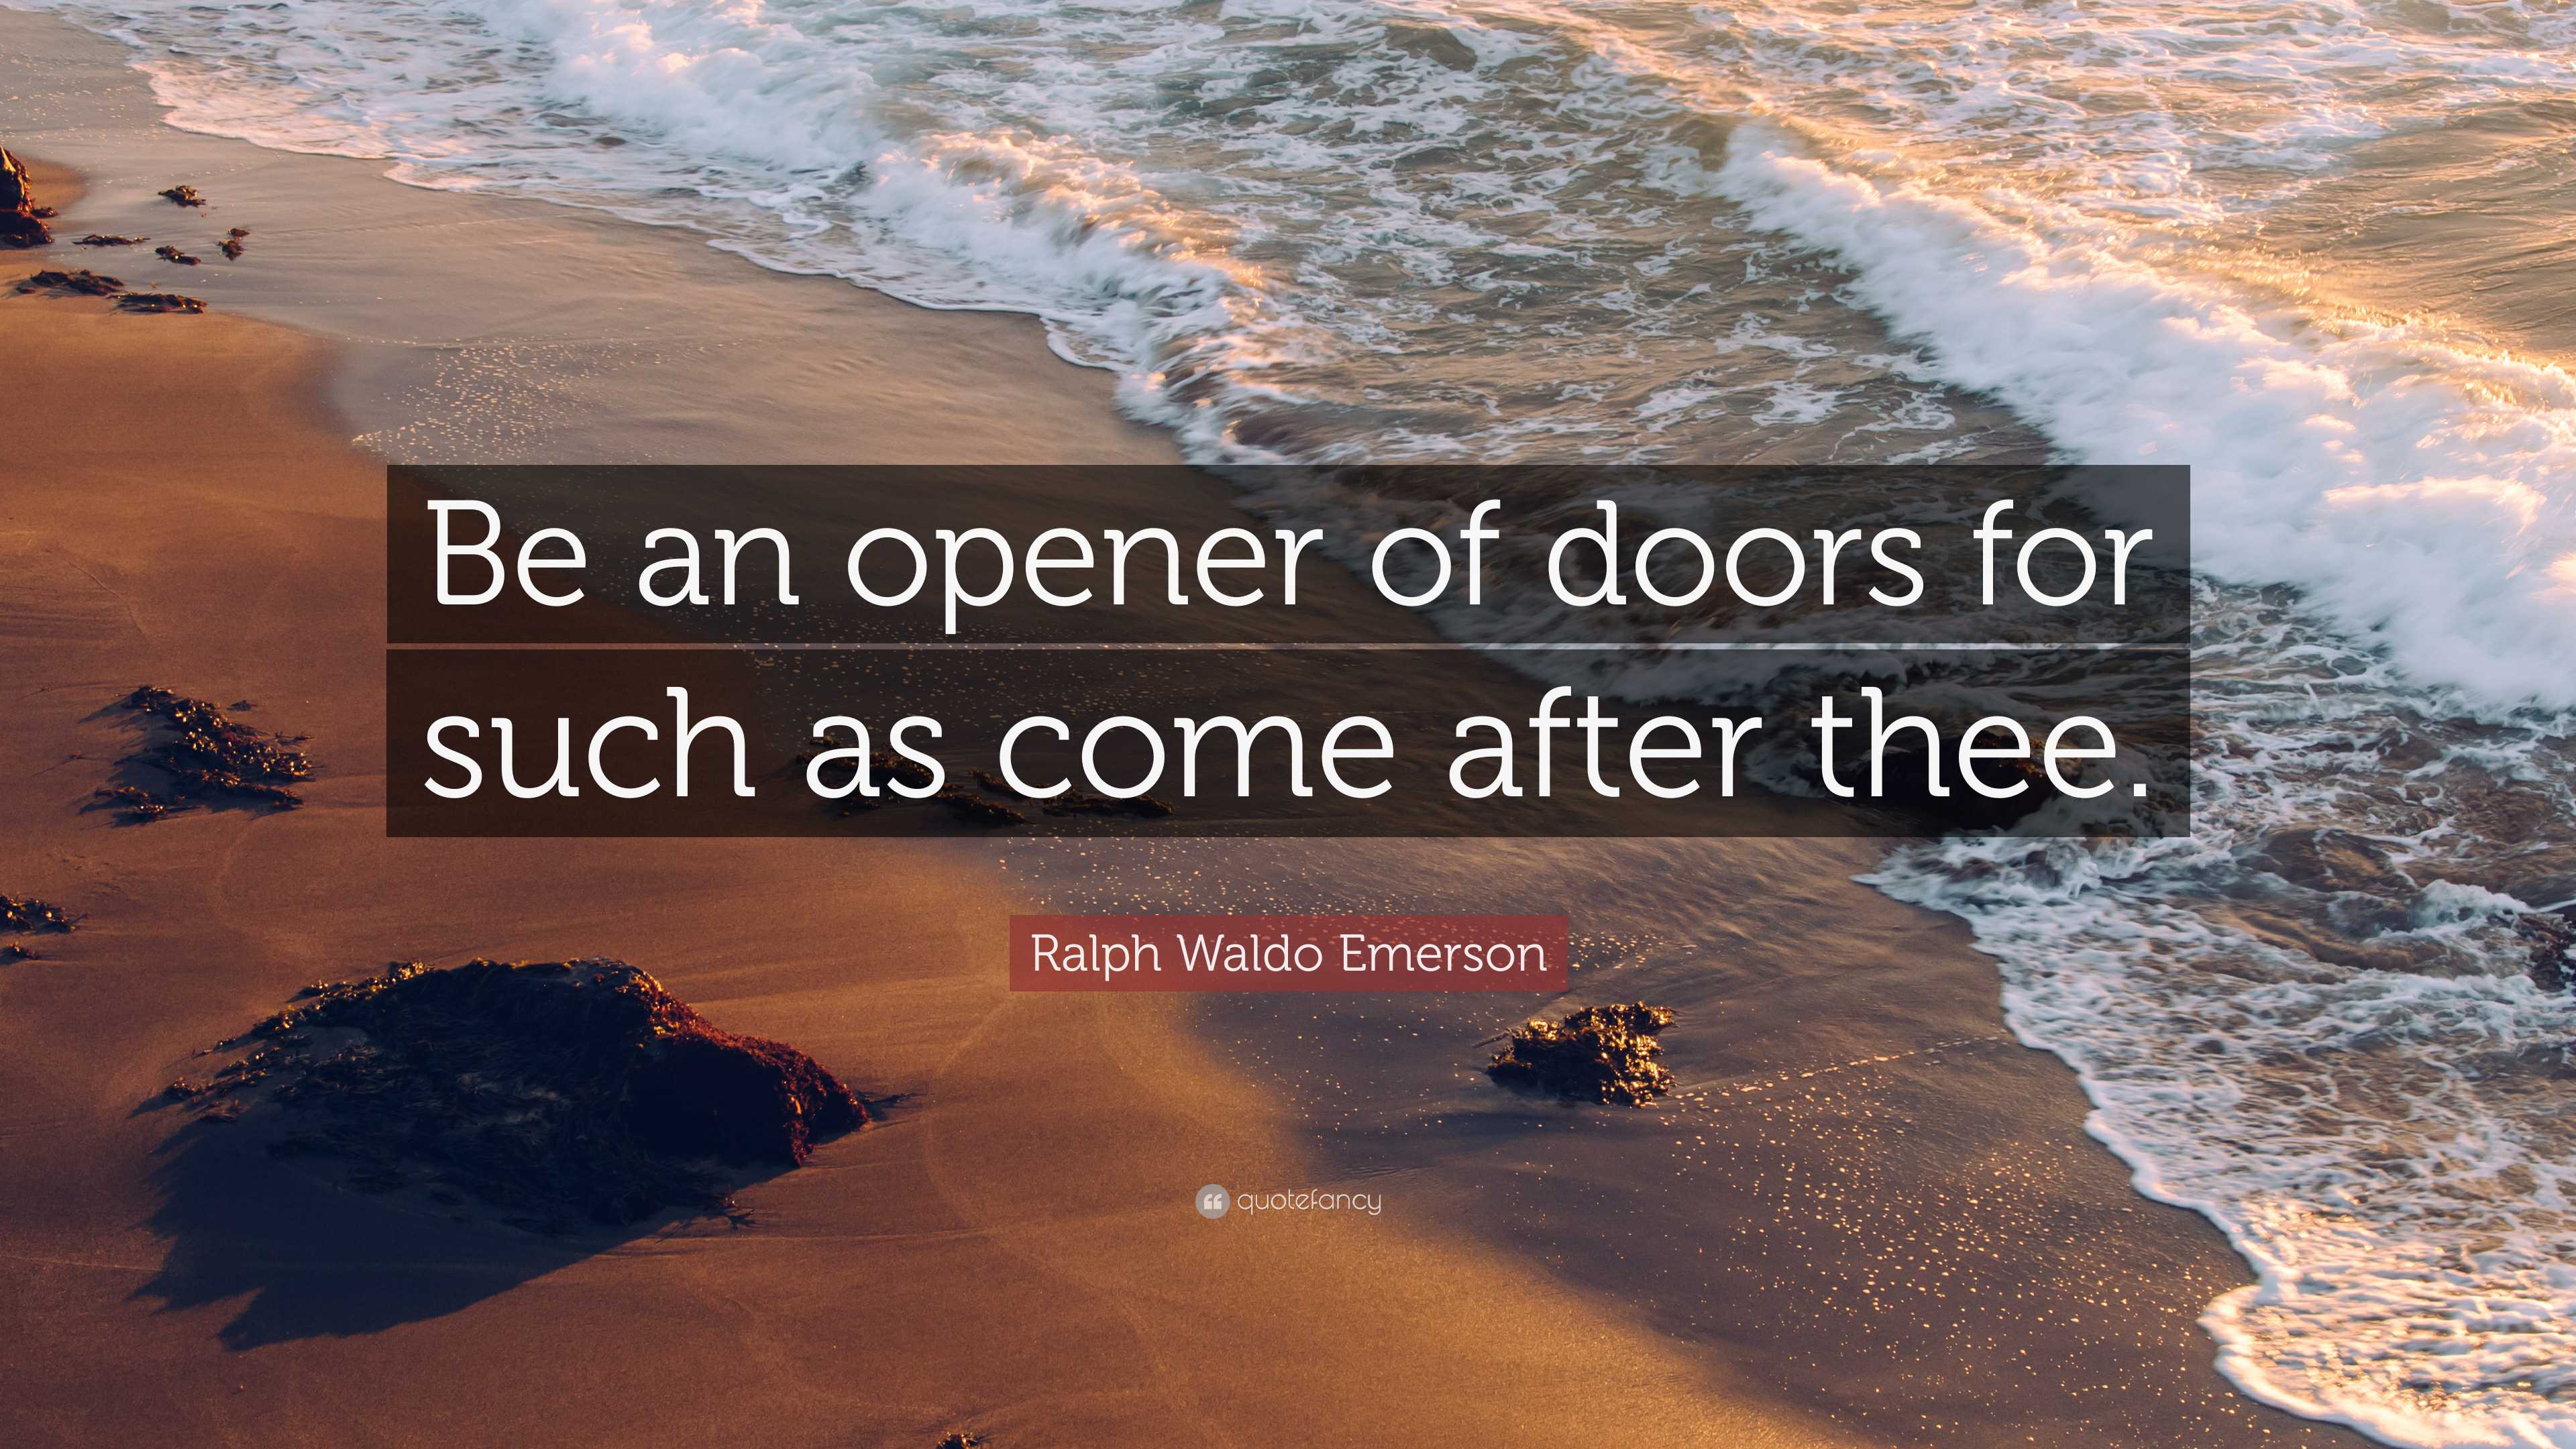 https://quotefancy.com/media/wallpaper/3840x2160/7939920-Ralph-Waldo-Emerson-Quote-Be-an-opener-of-doors-for-such-as-come.jpg